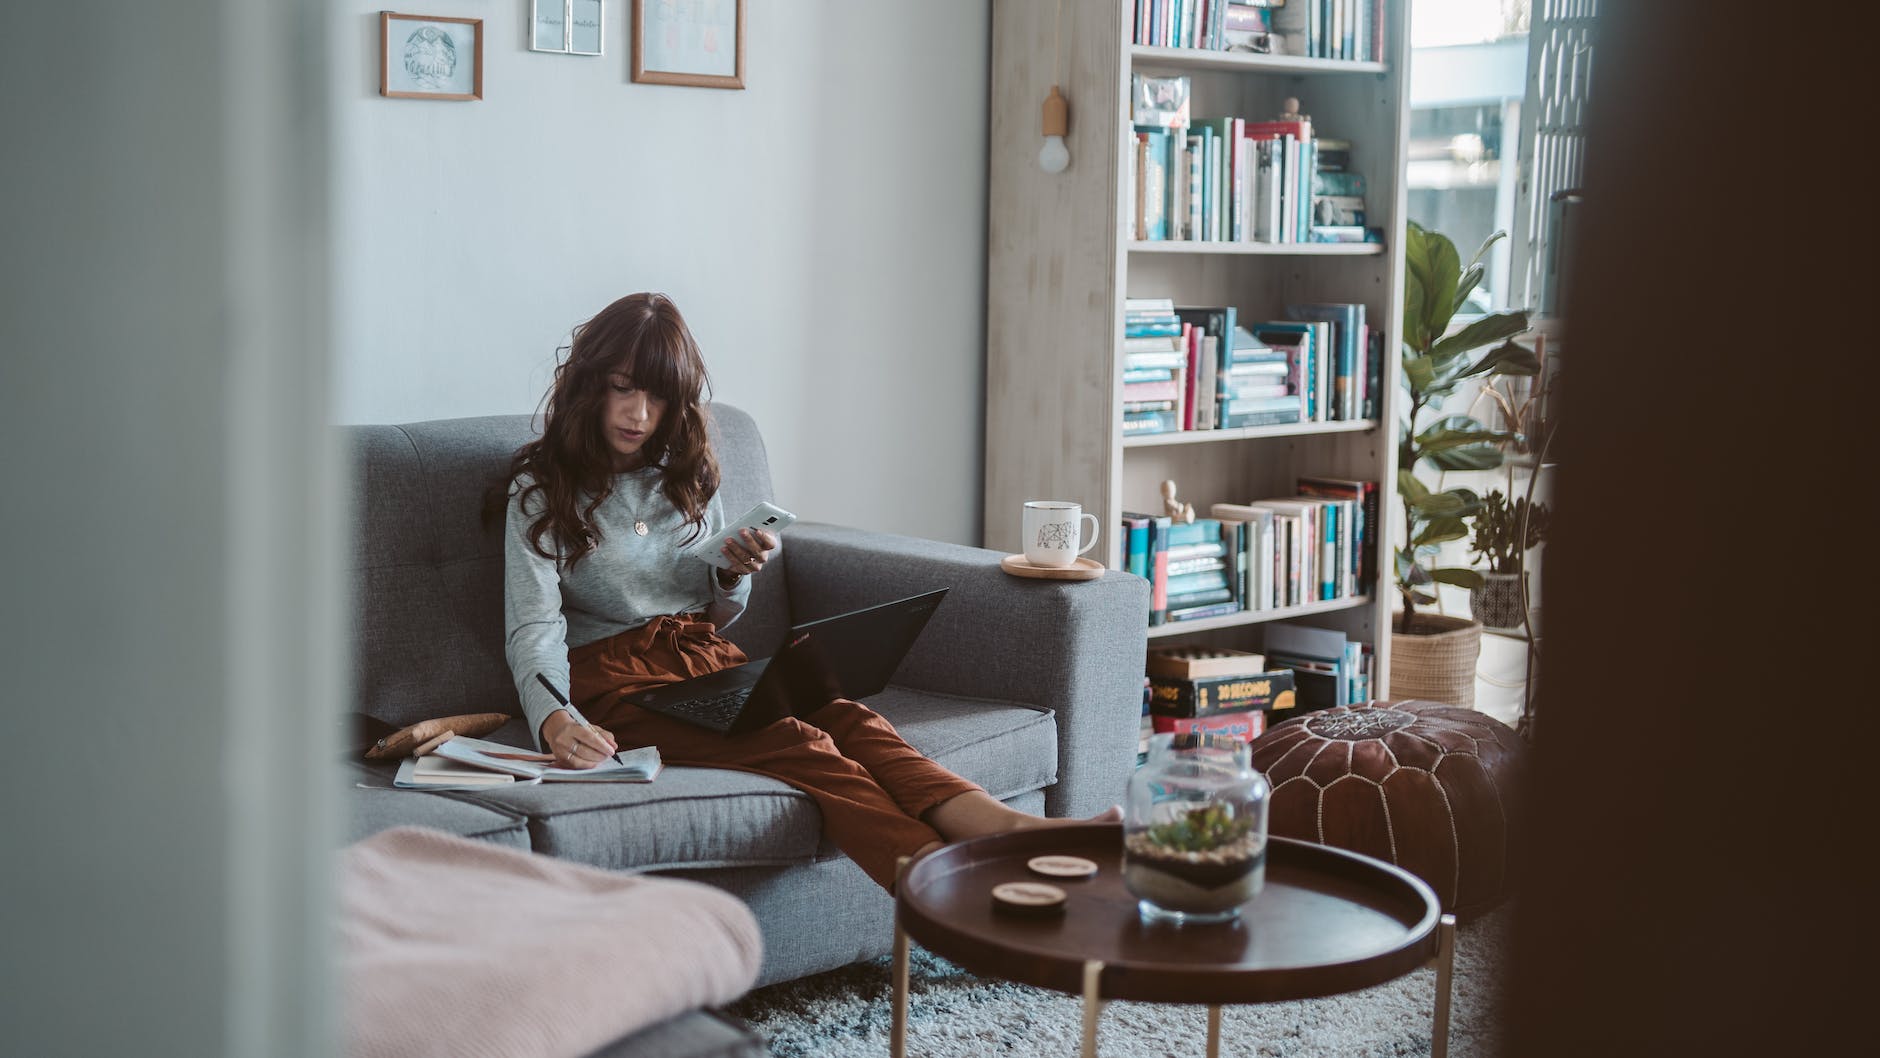 photo of woman sitting on couch, side hustles